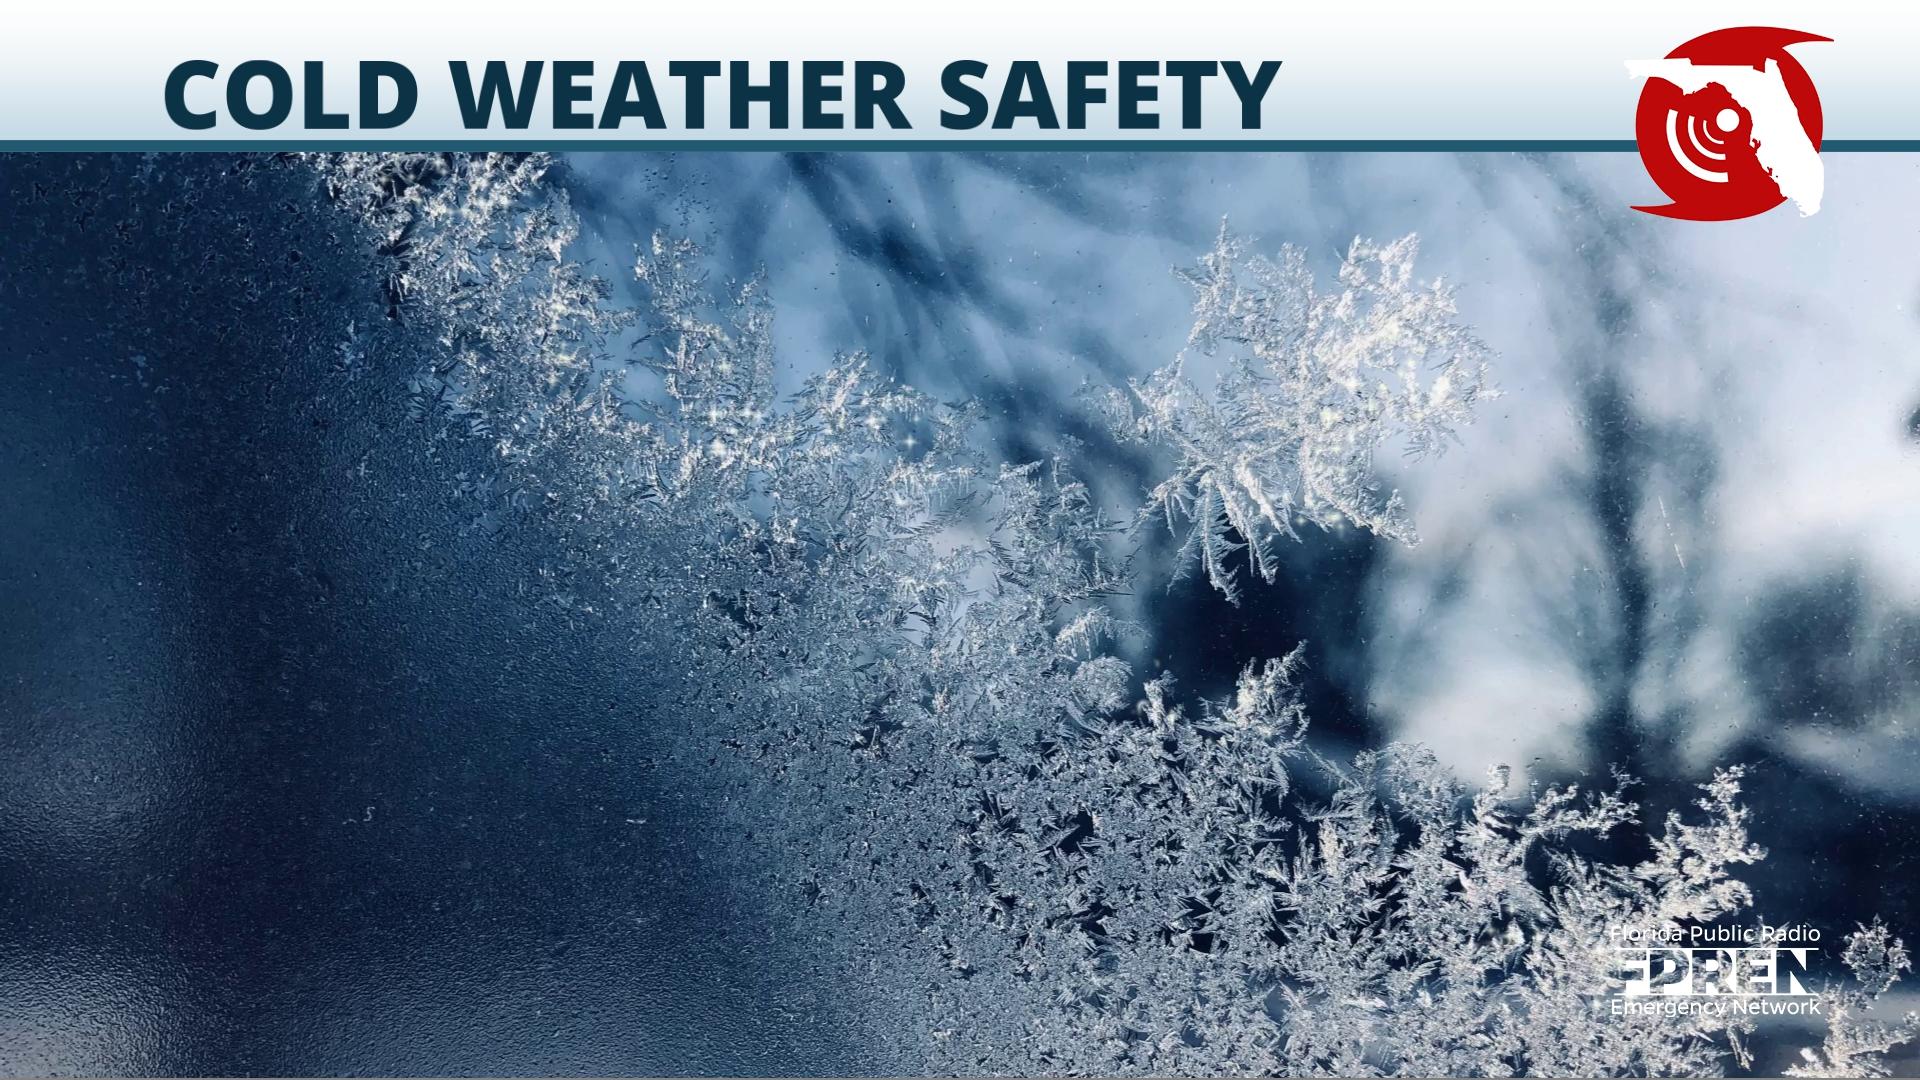 Featured image for “Experts stress cold weather safety ahead of frigid holiday weekend”